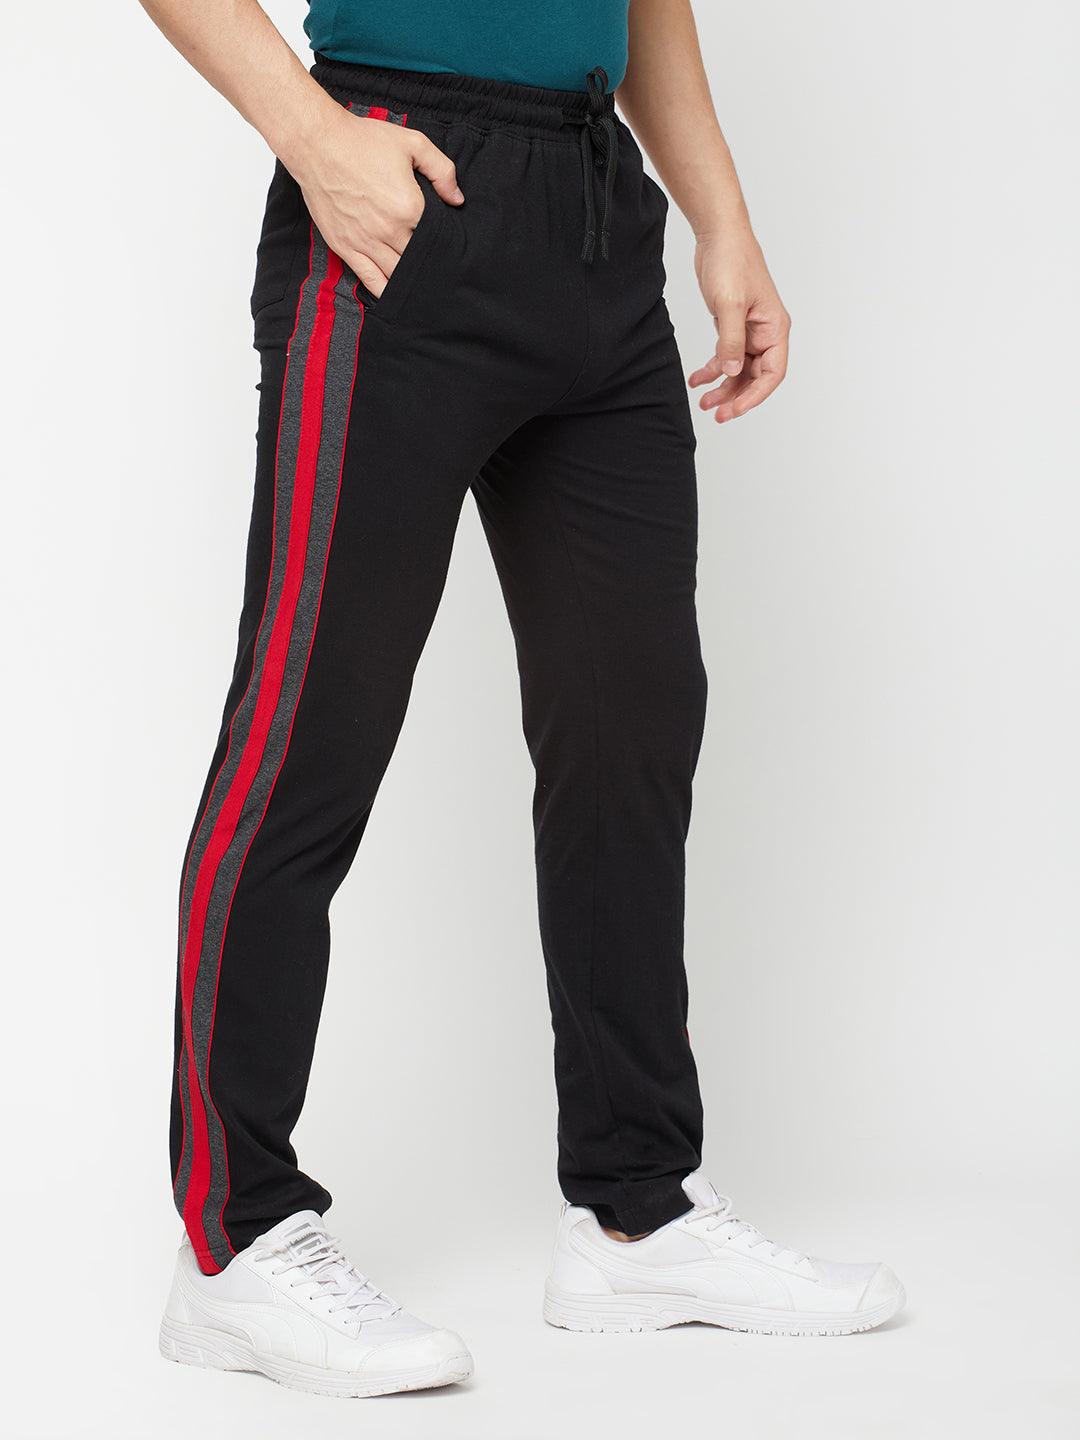 Sporto Mens Quick Dry Solid Track Pants Charcoal  Sporto by Macho